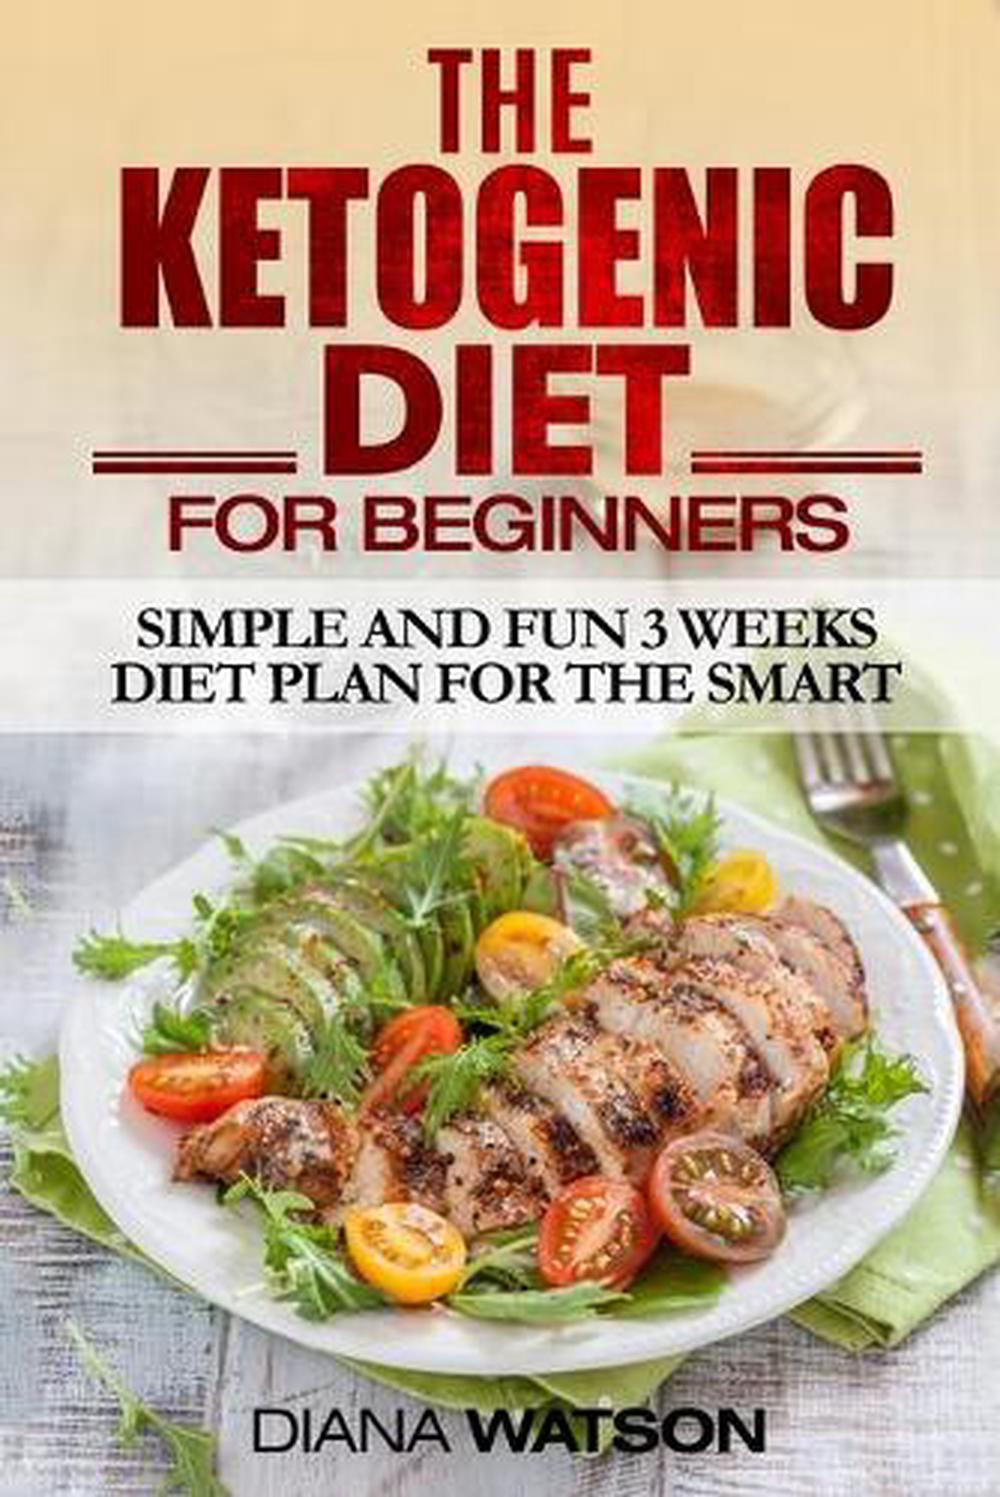 Most Popular Keto Diet for Beginners Book Ever